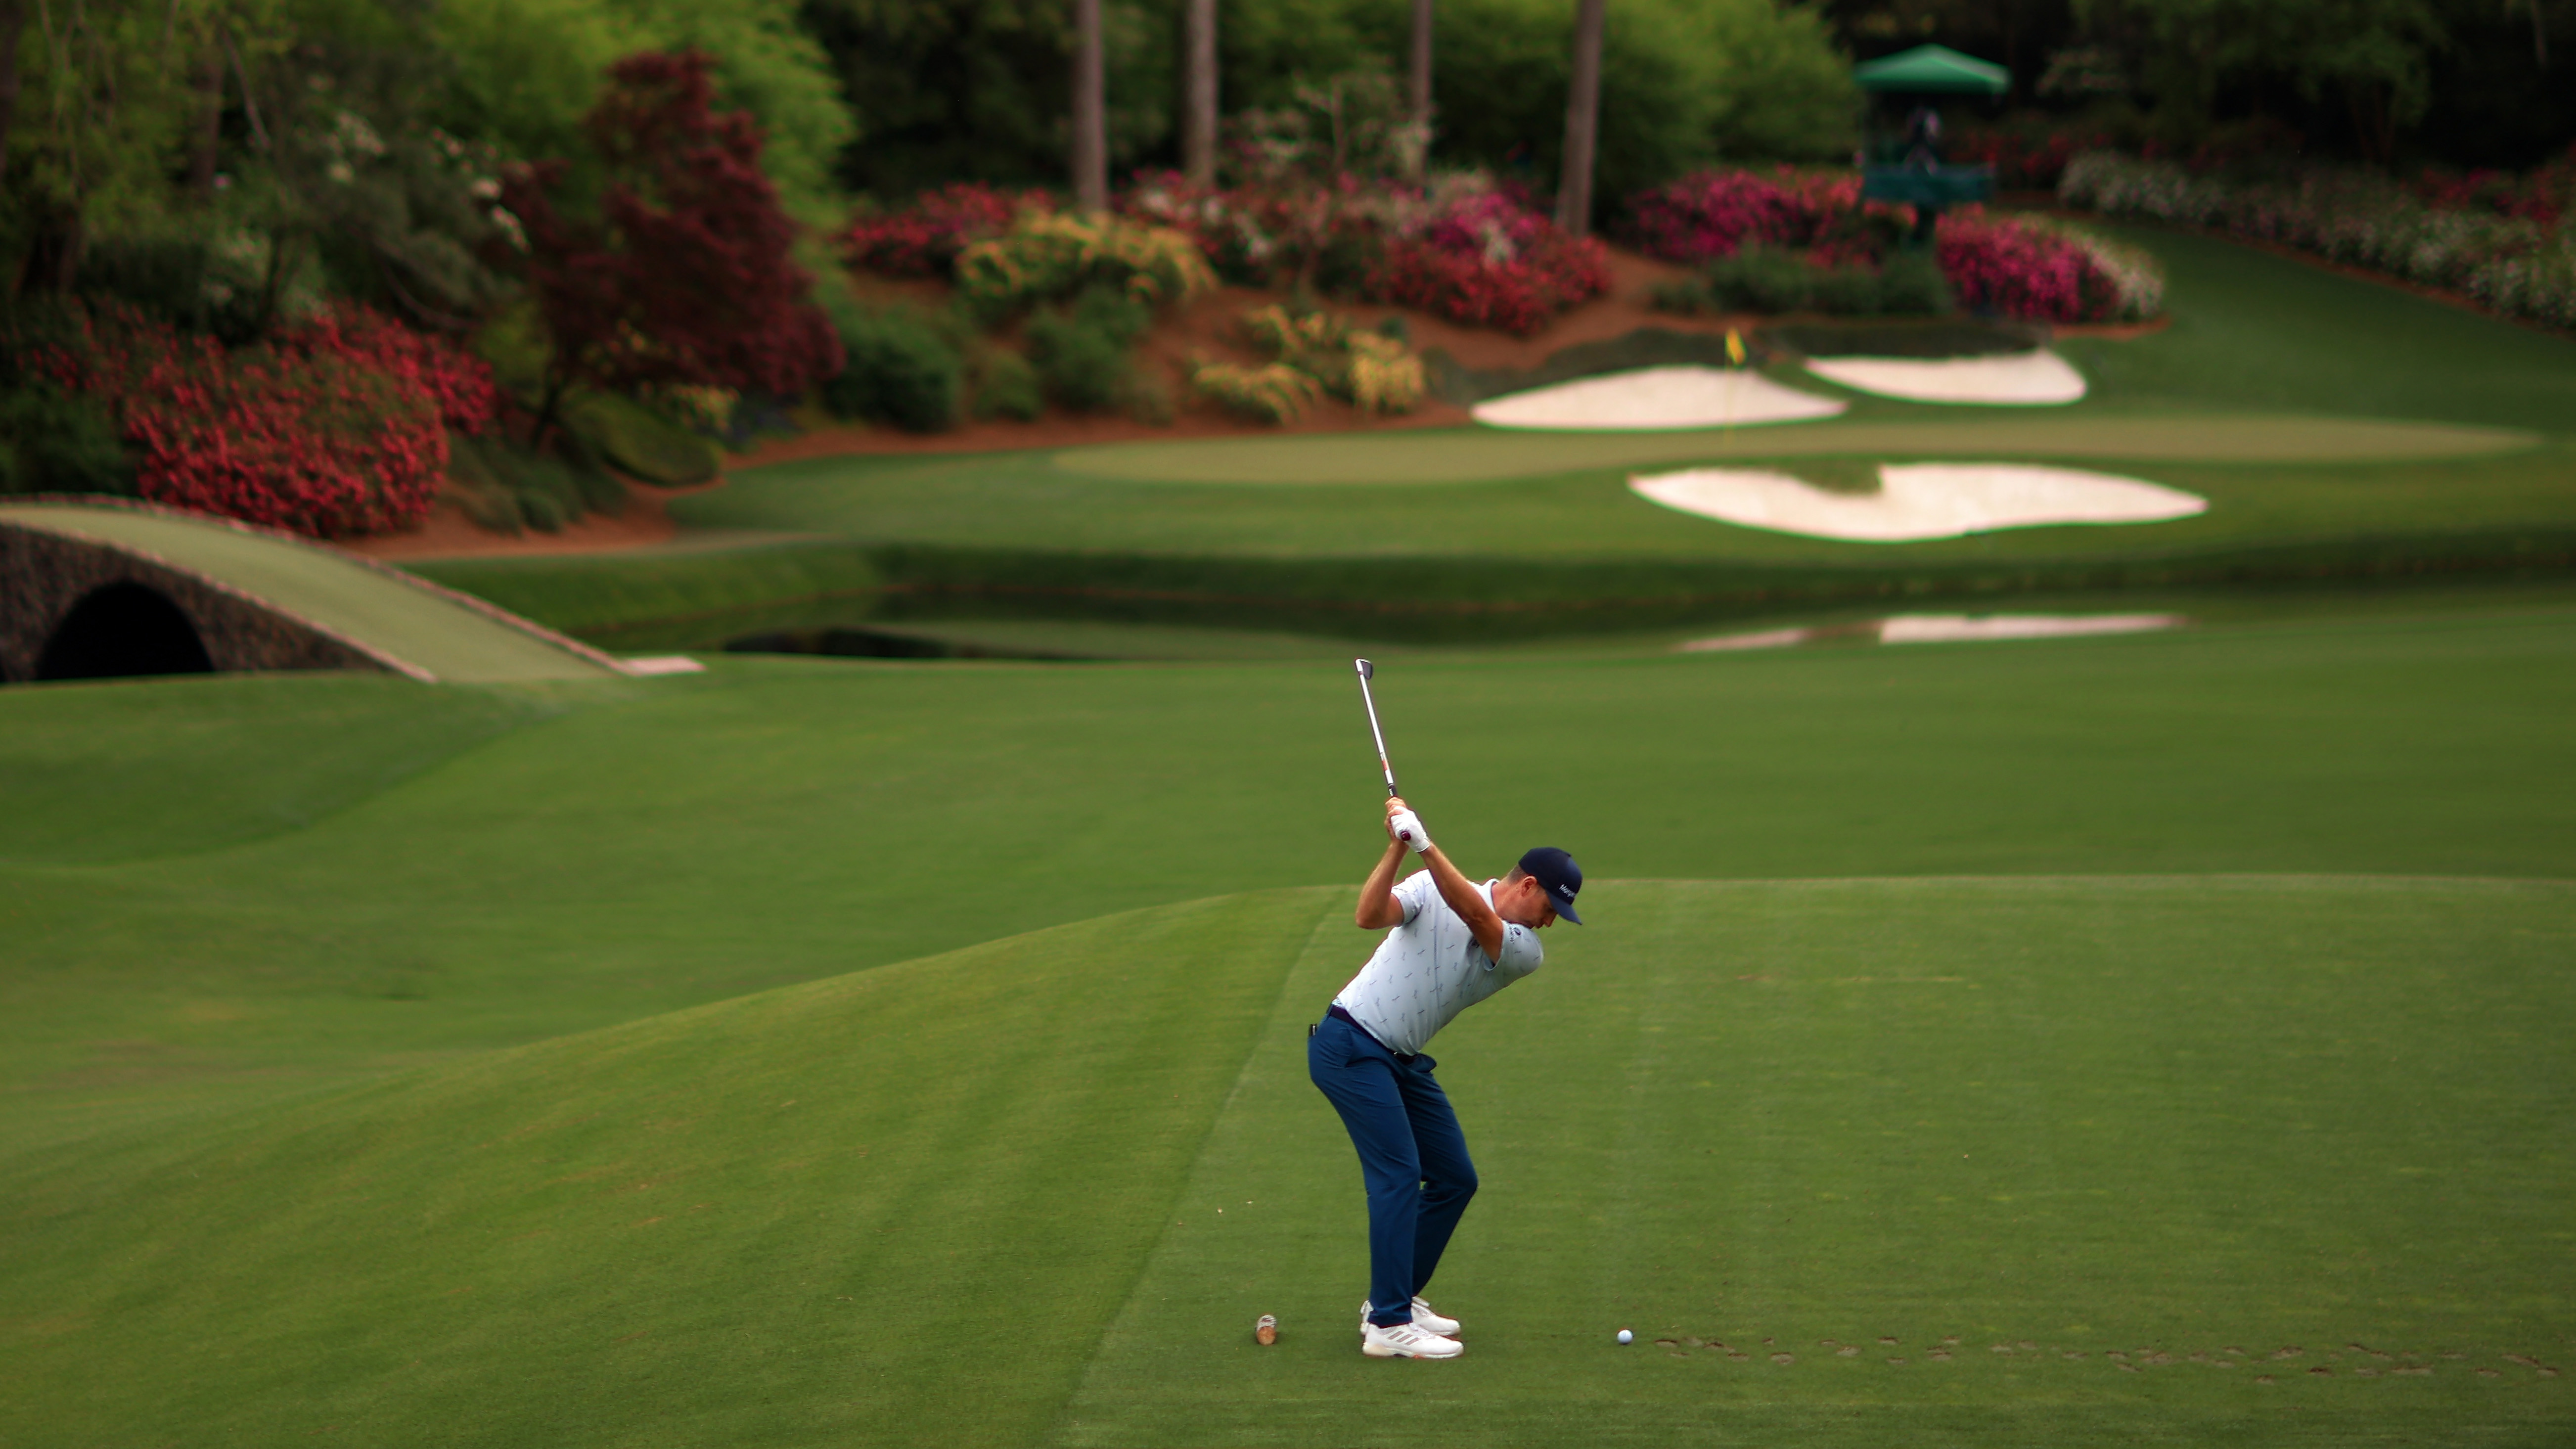 Justin Rose of England tees off on No. 12 on Thursday, April 8, 2021, at The Masters in Augusta, Ga.